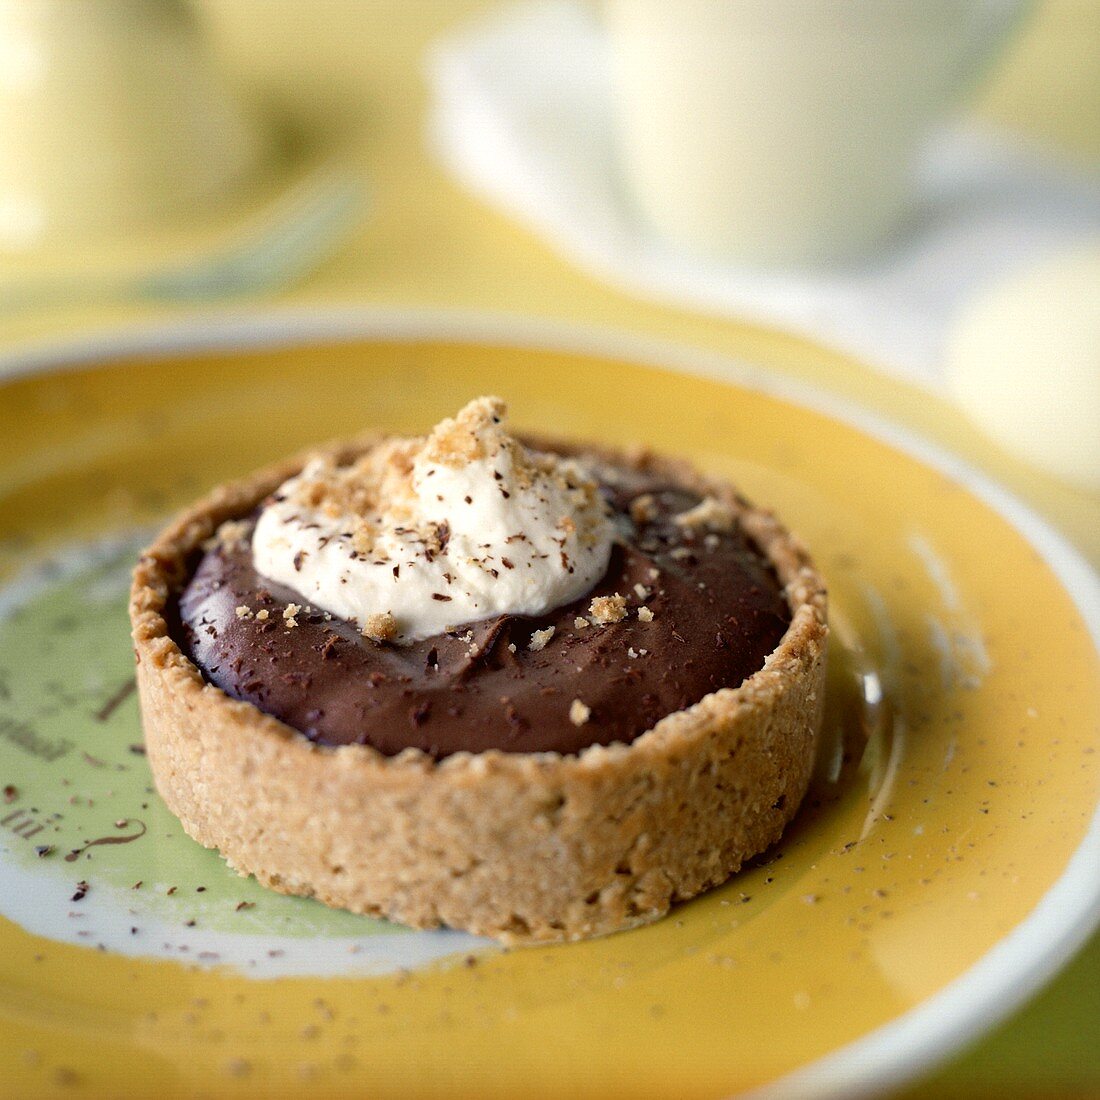 Chocolate Cream Pie Tartlet in an Oatmeal Crust with Whipped Cream